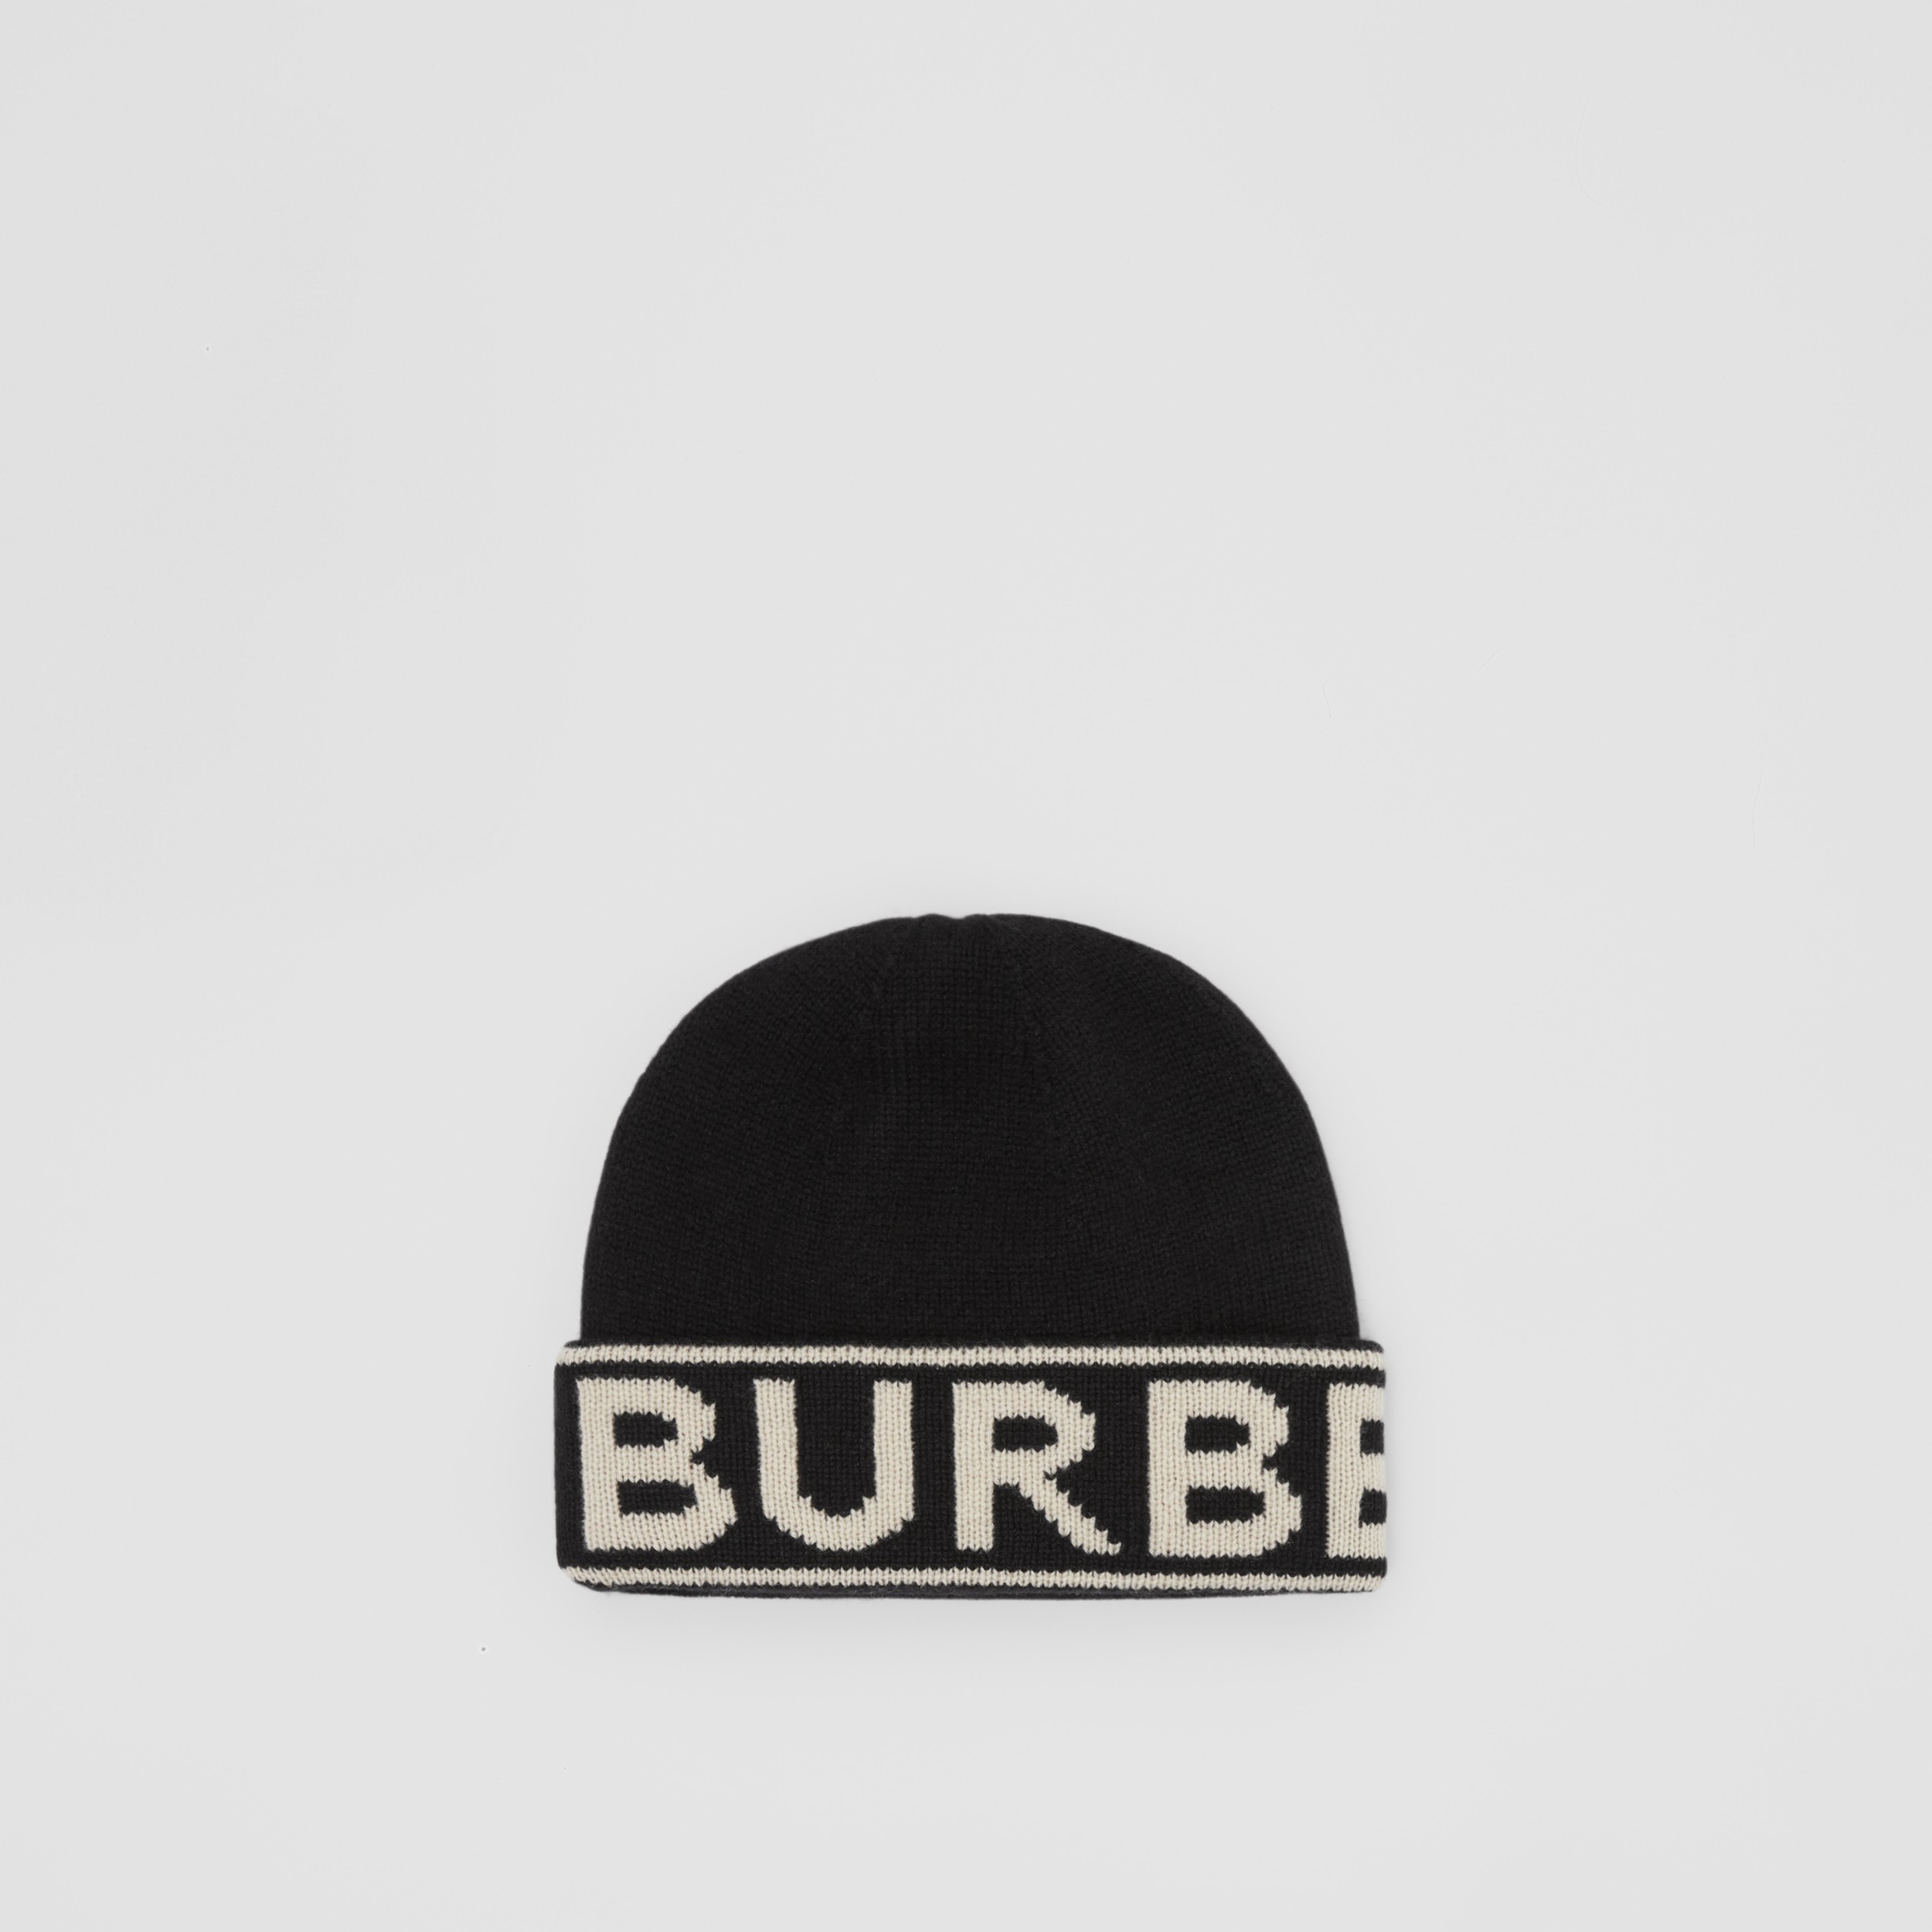 Actualizar 52+ imagen burberry knitted hat